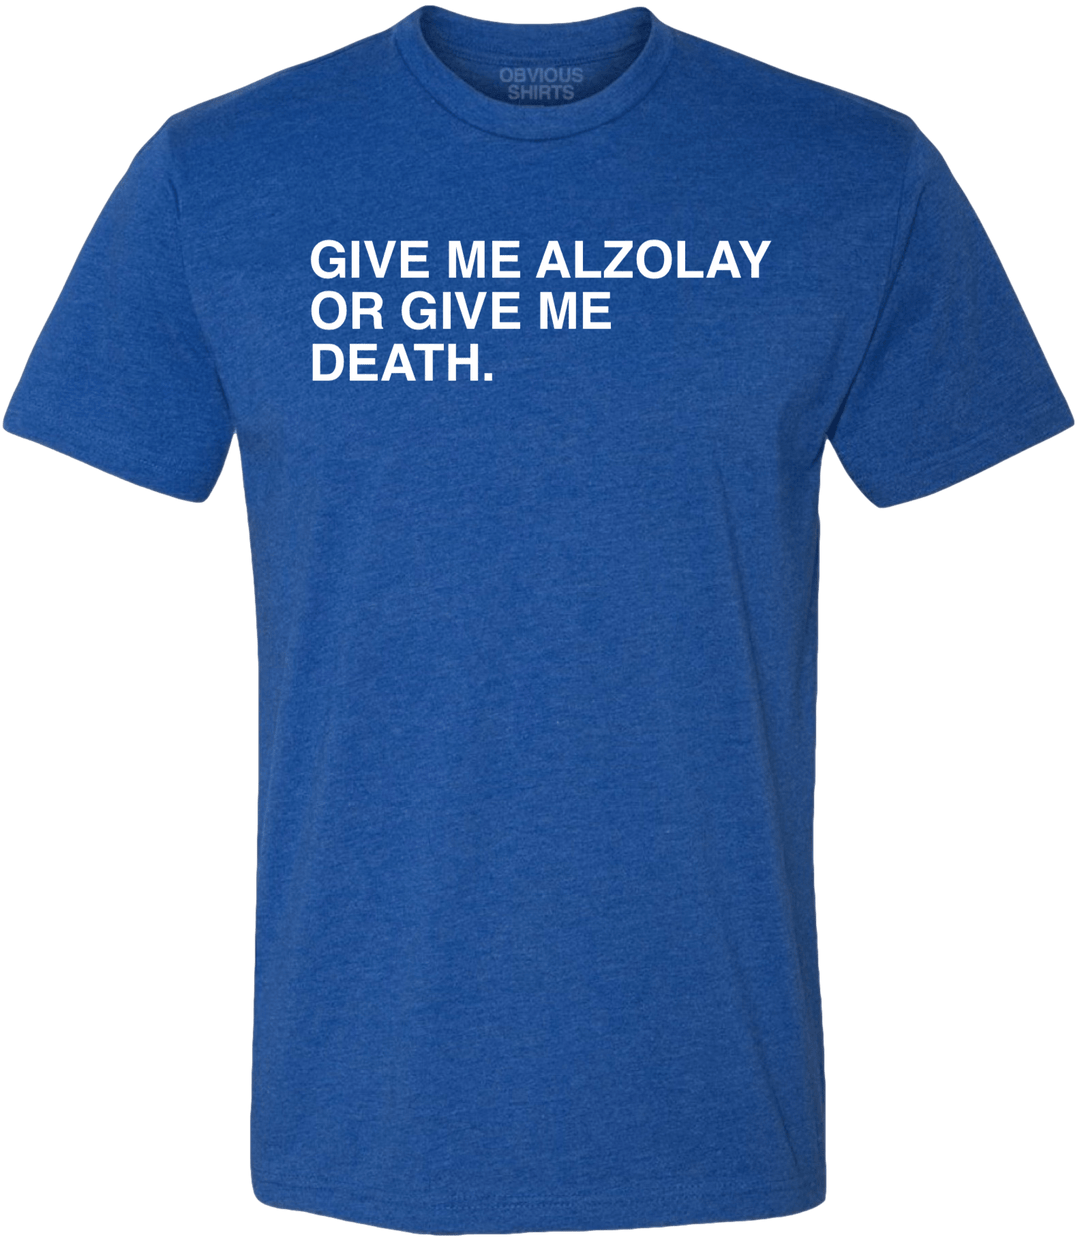 GIVE ME ALZOLAY OR GIVE ME DEATH. - OBVIOUS SHIRTS